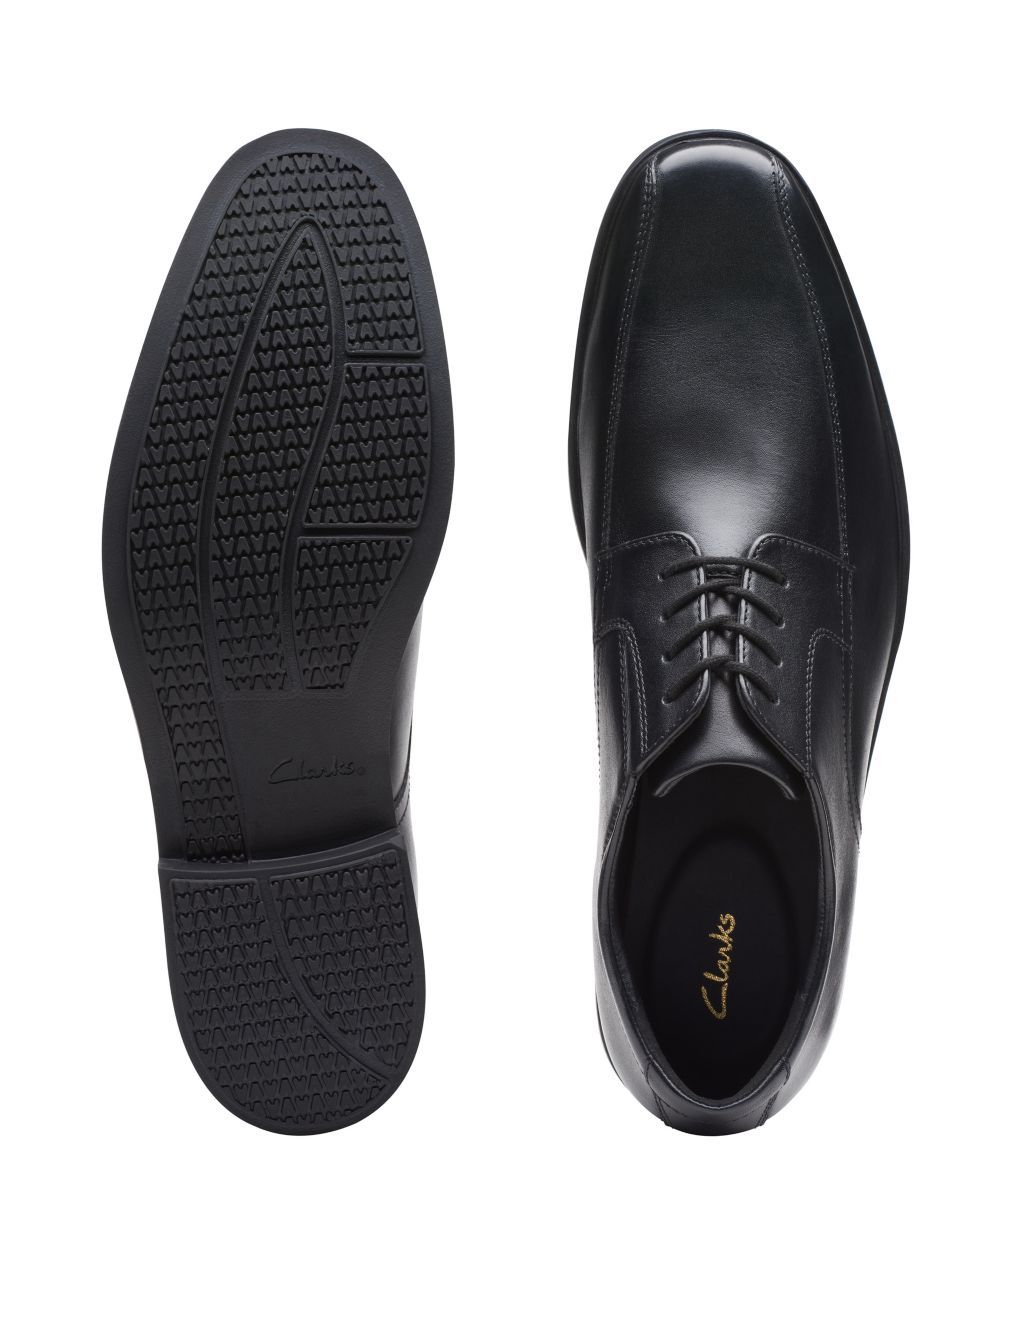 Leather Oxford Shoes image 7